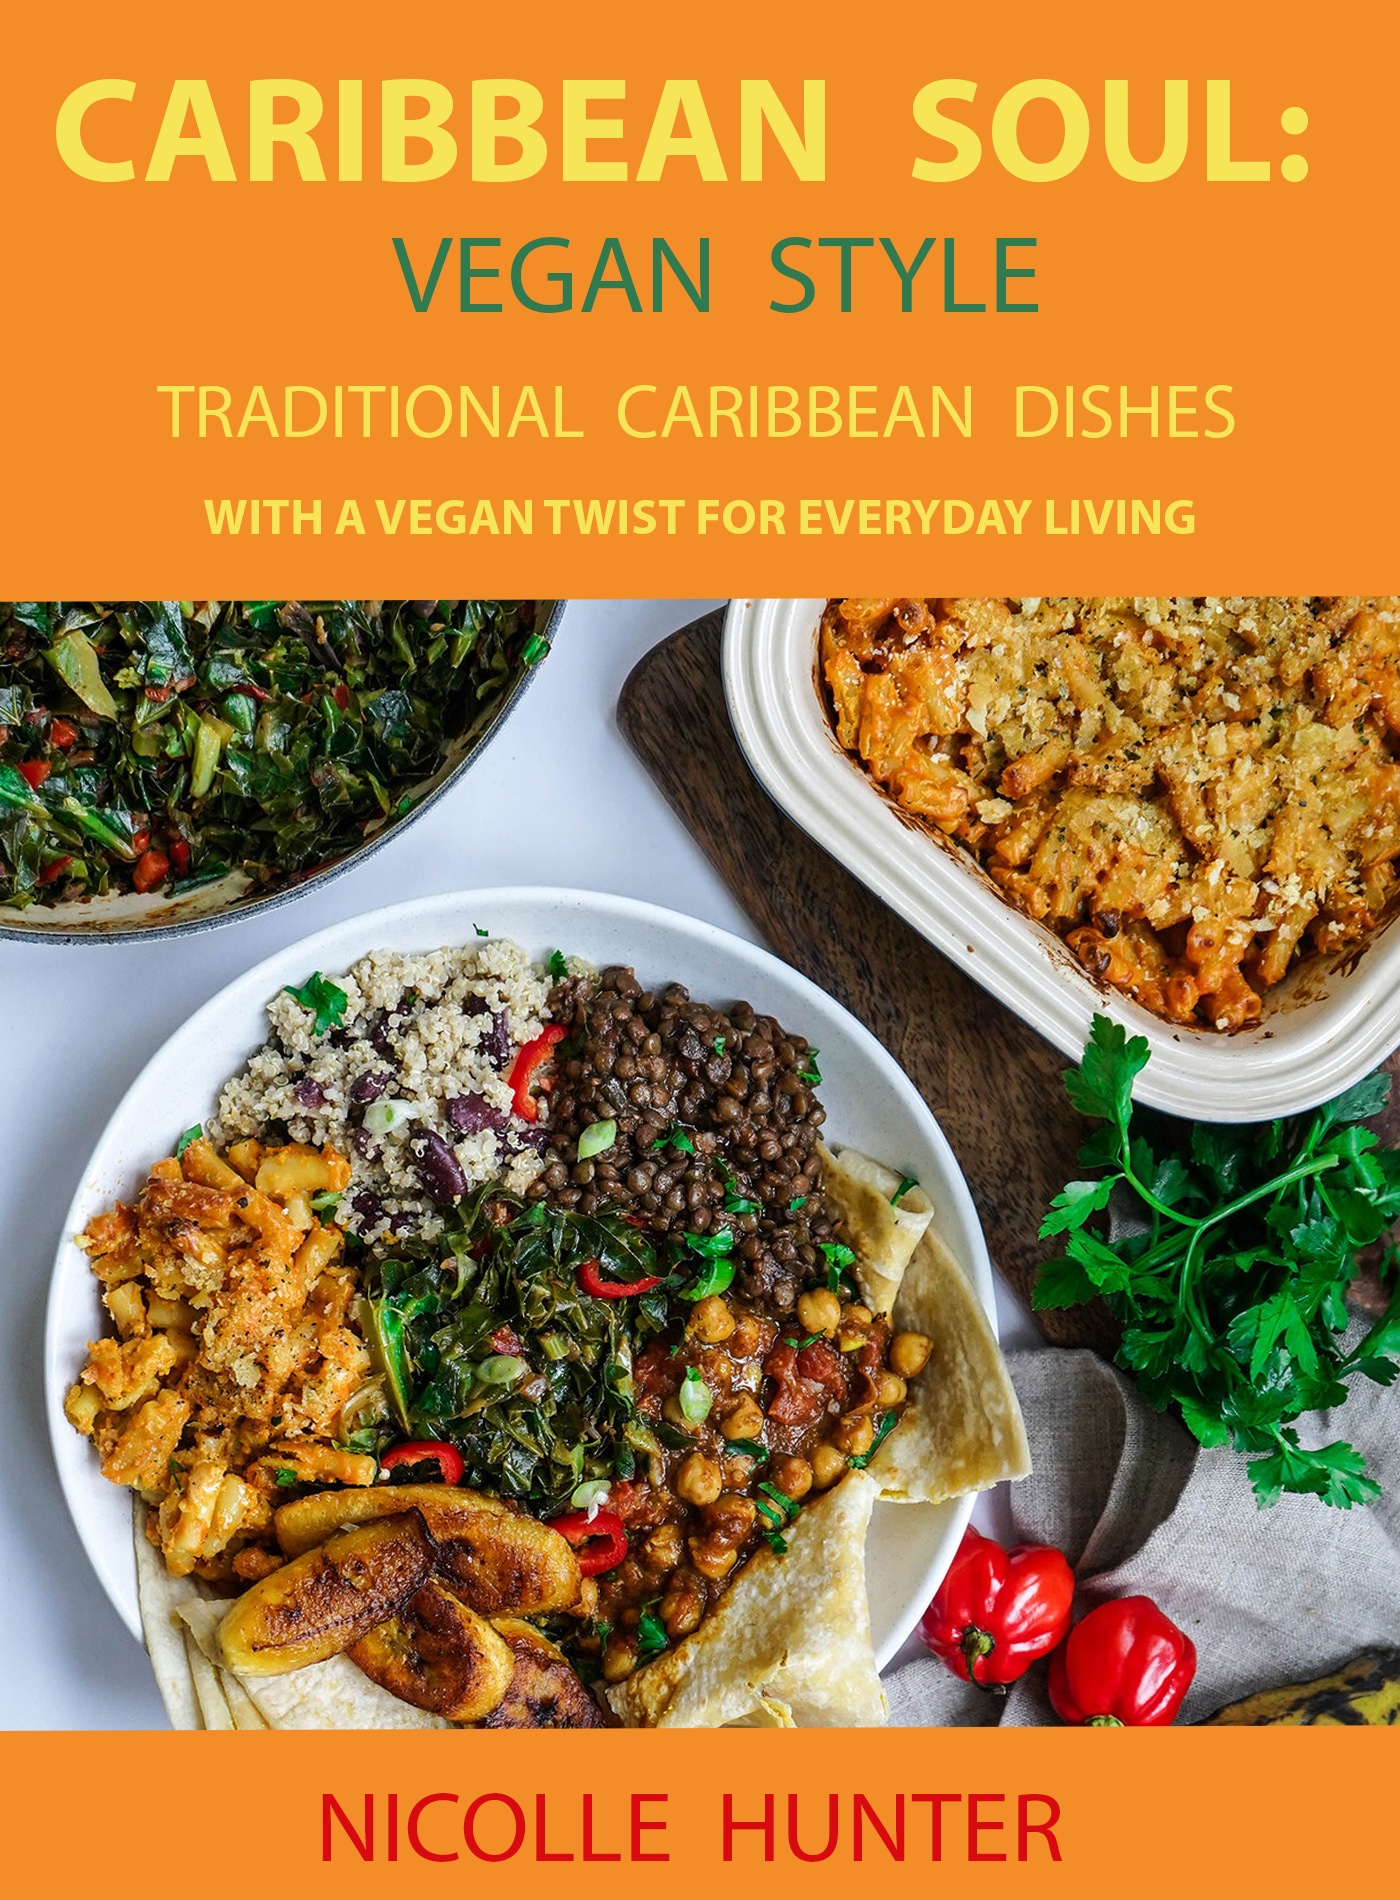 Image of a selection of Caribbean vegan dishes on a white background, with an orange border with text that reads Caribbean Soul Vegan Style, Traditional Caribbean dishes, with a vegan twist for everyday living by Nicolle Hunter.